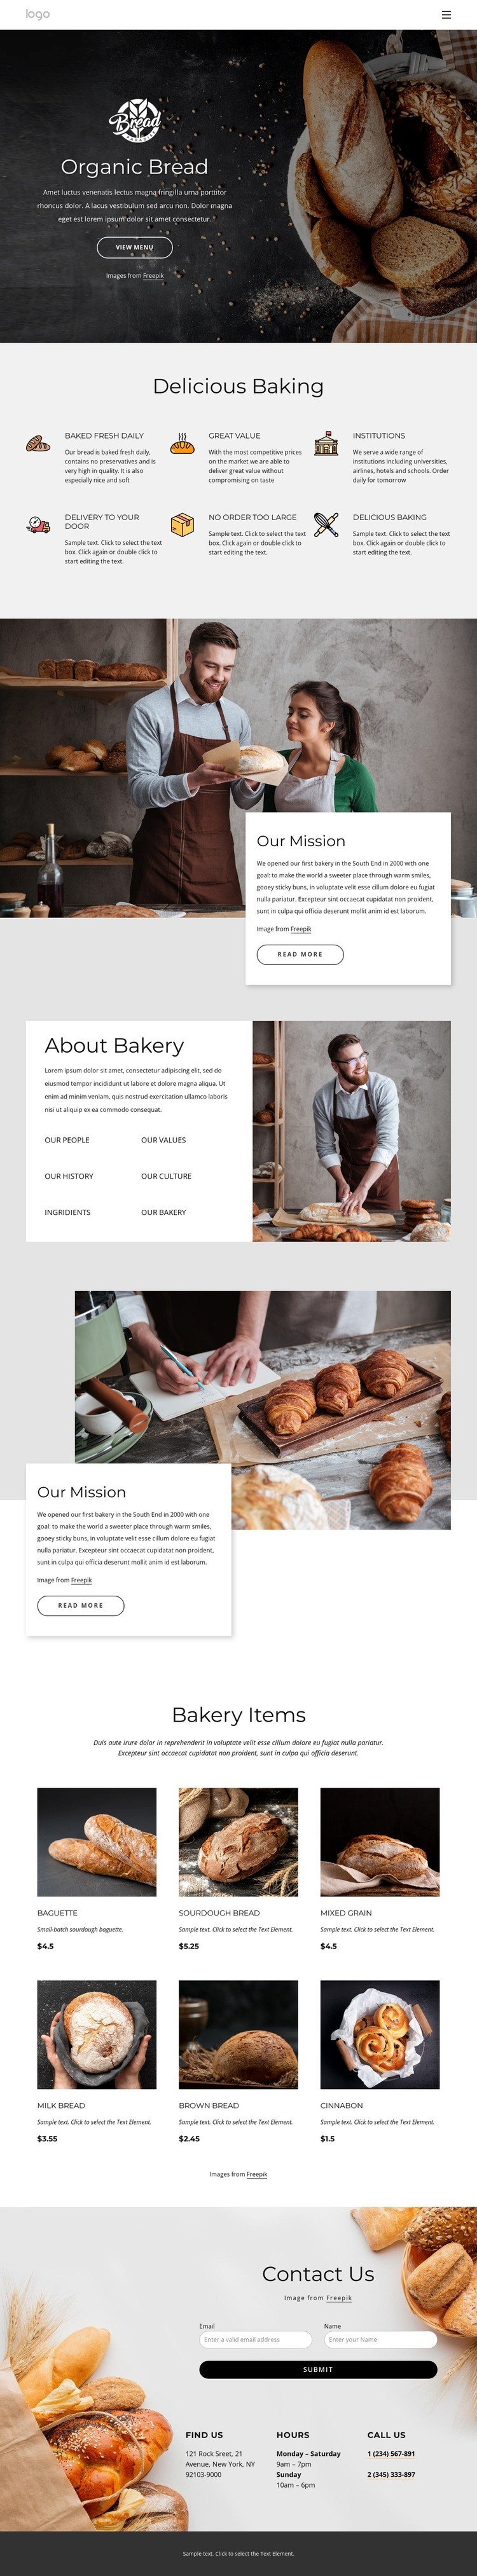 Bagels, buns, rolls, biscuits and loaf breads Wix Template Alternative